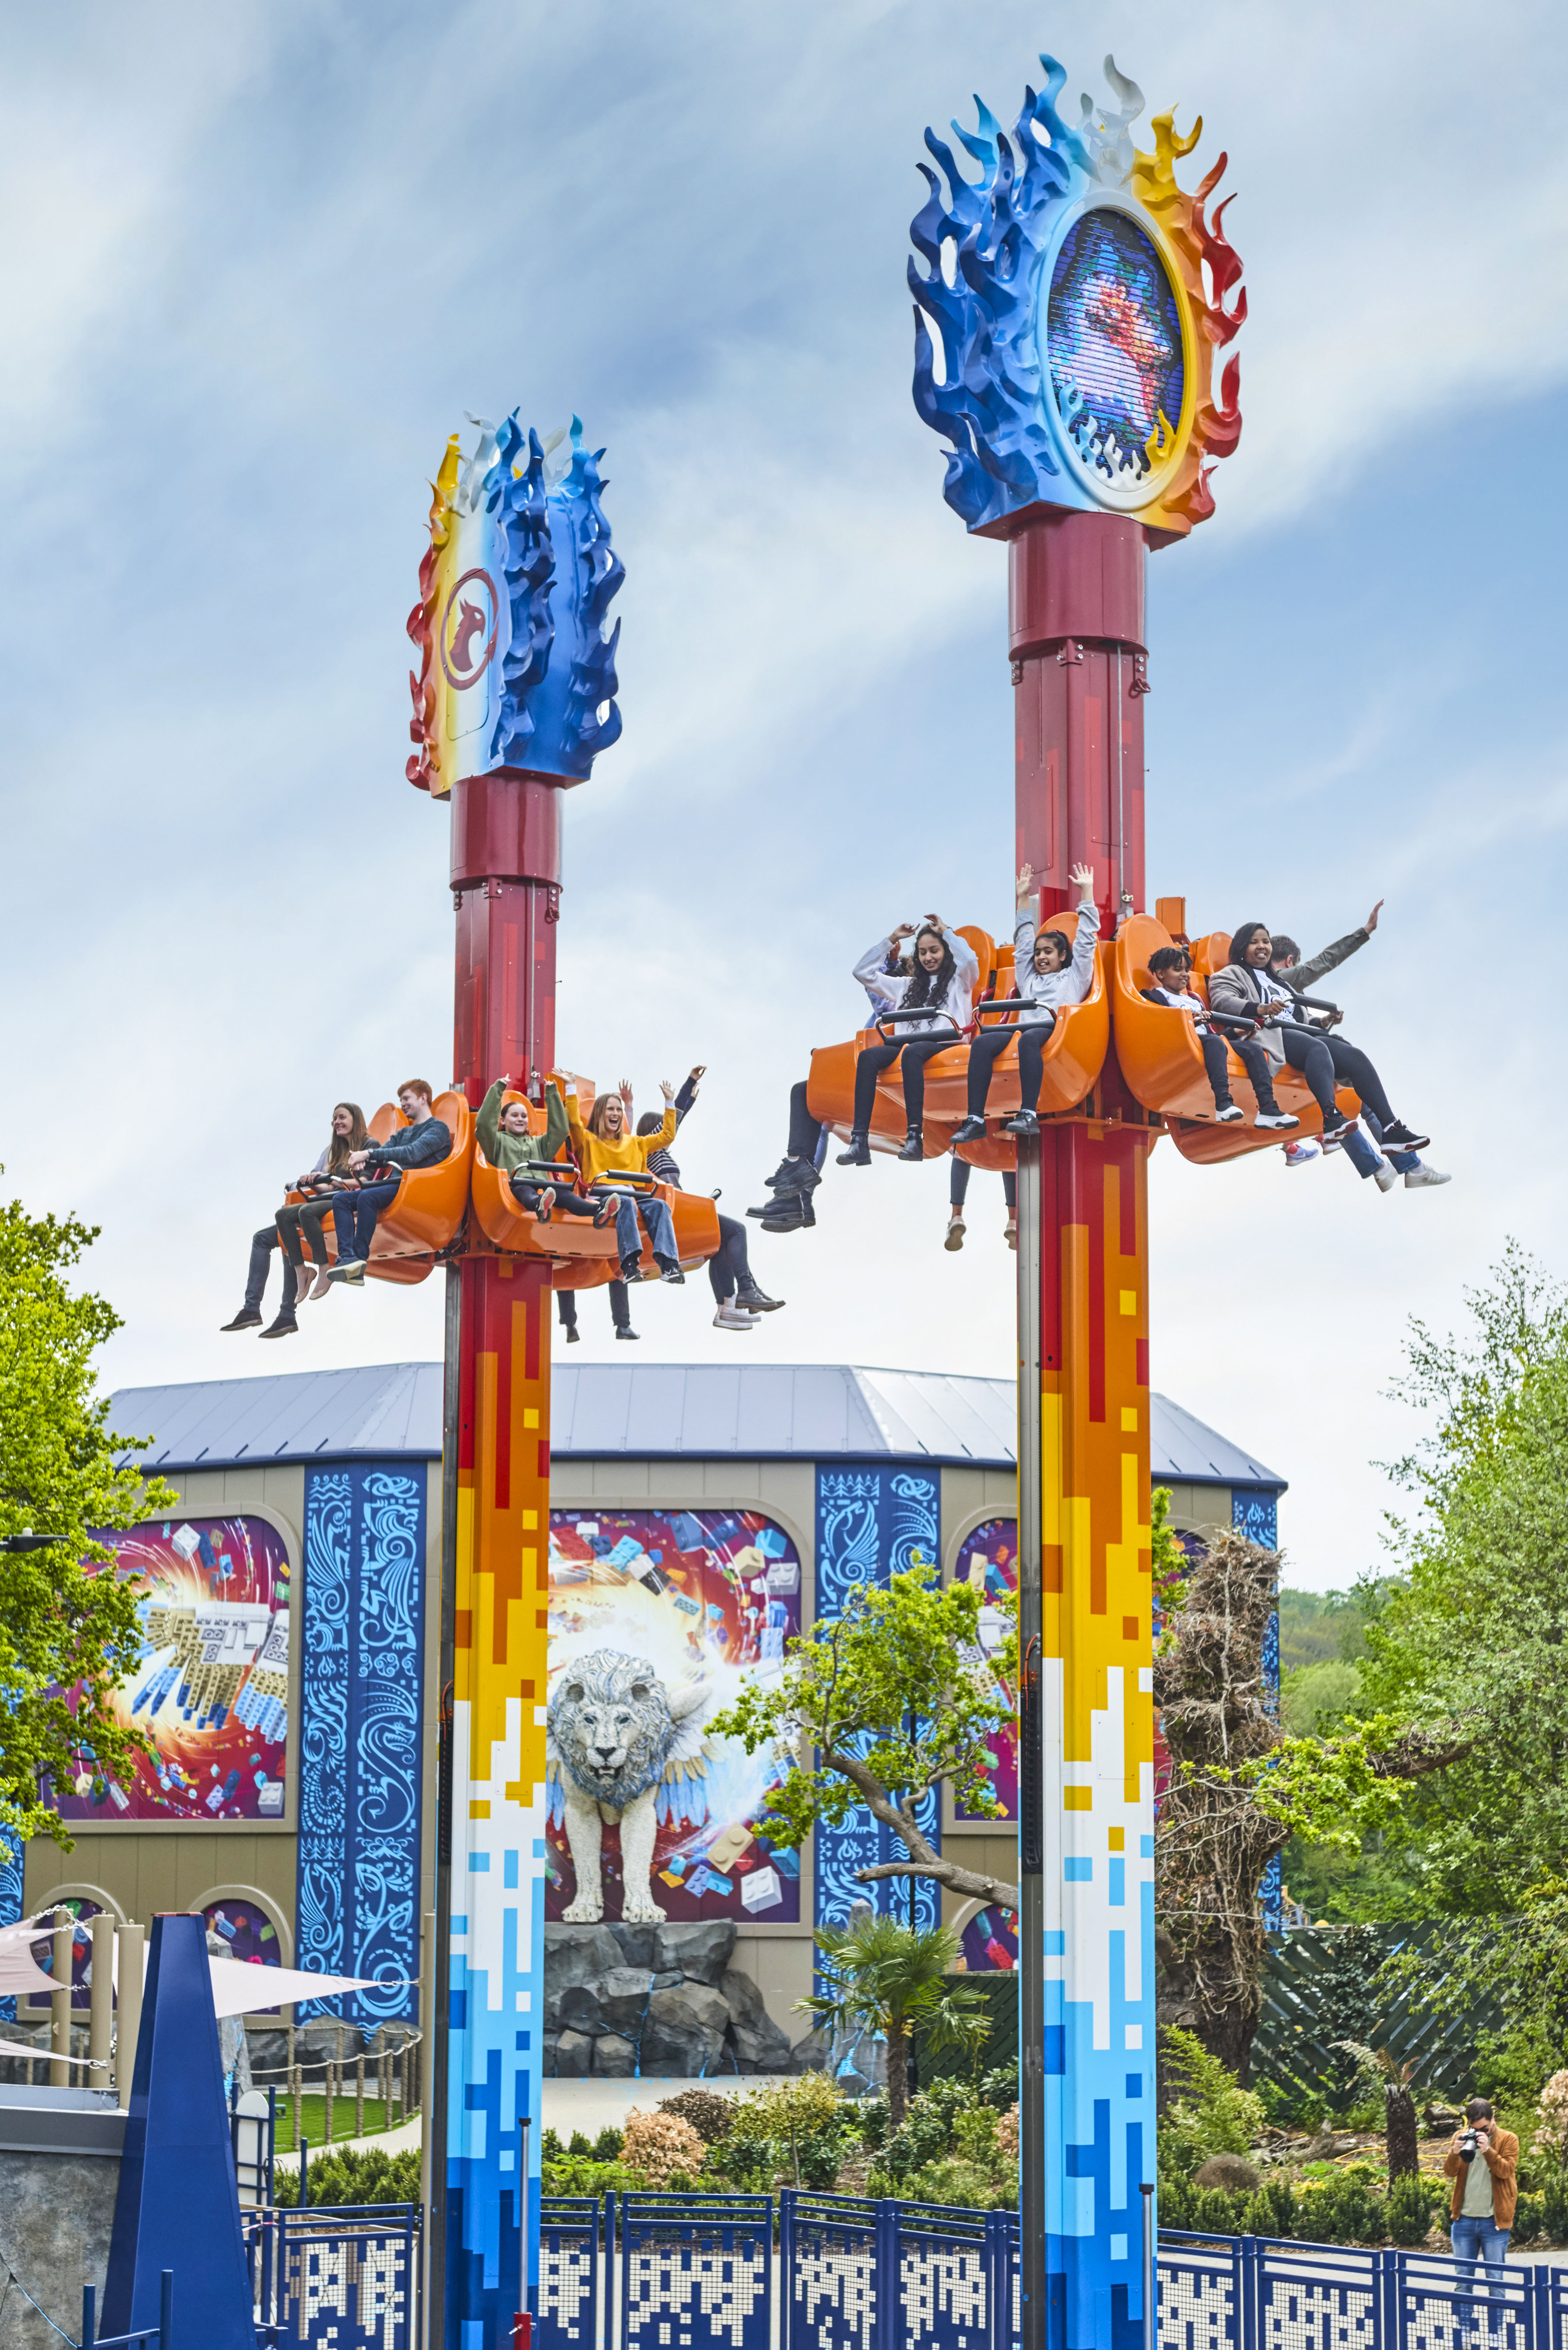 Fire & Ice Freefall At The LEGOLAND Windsor Resort